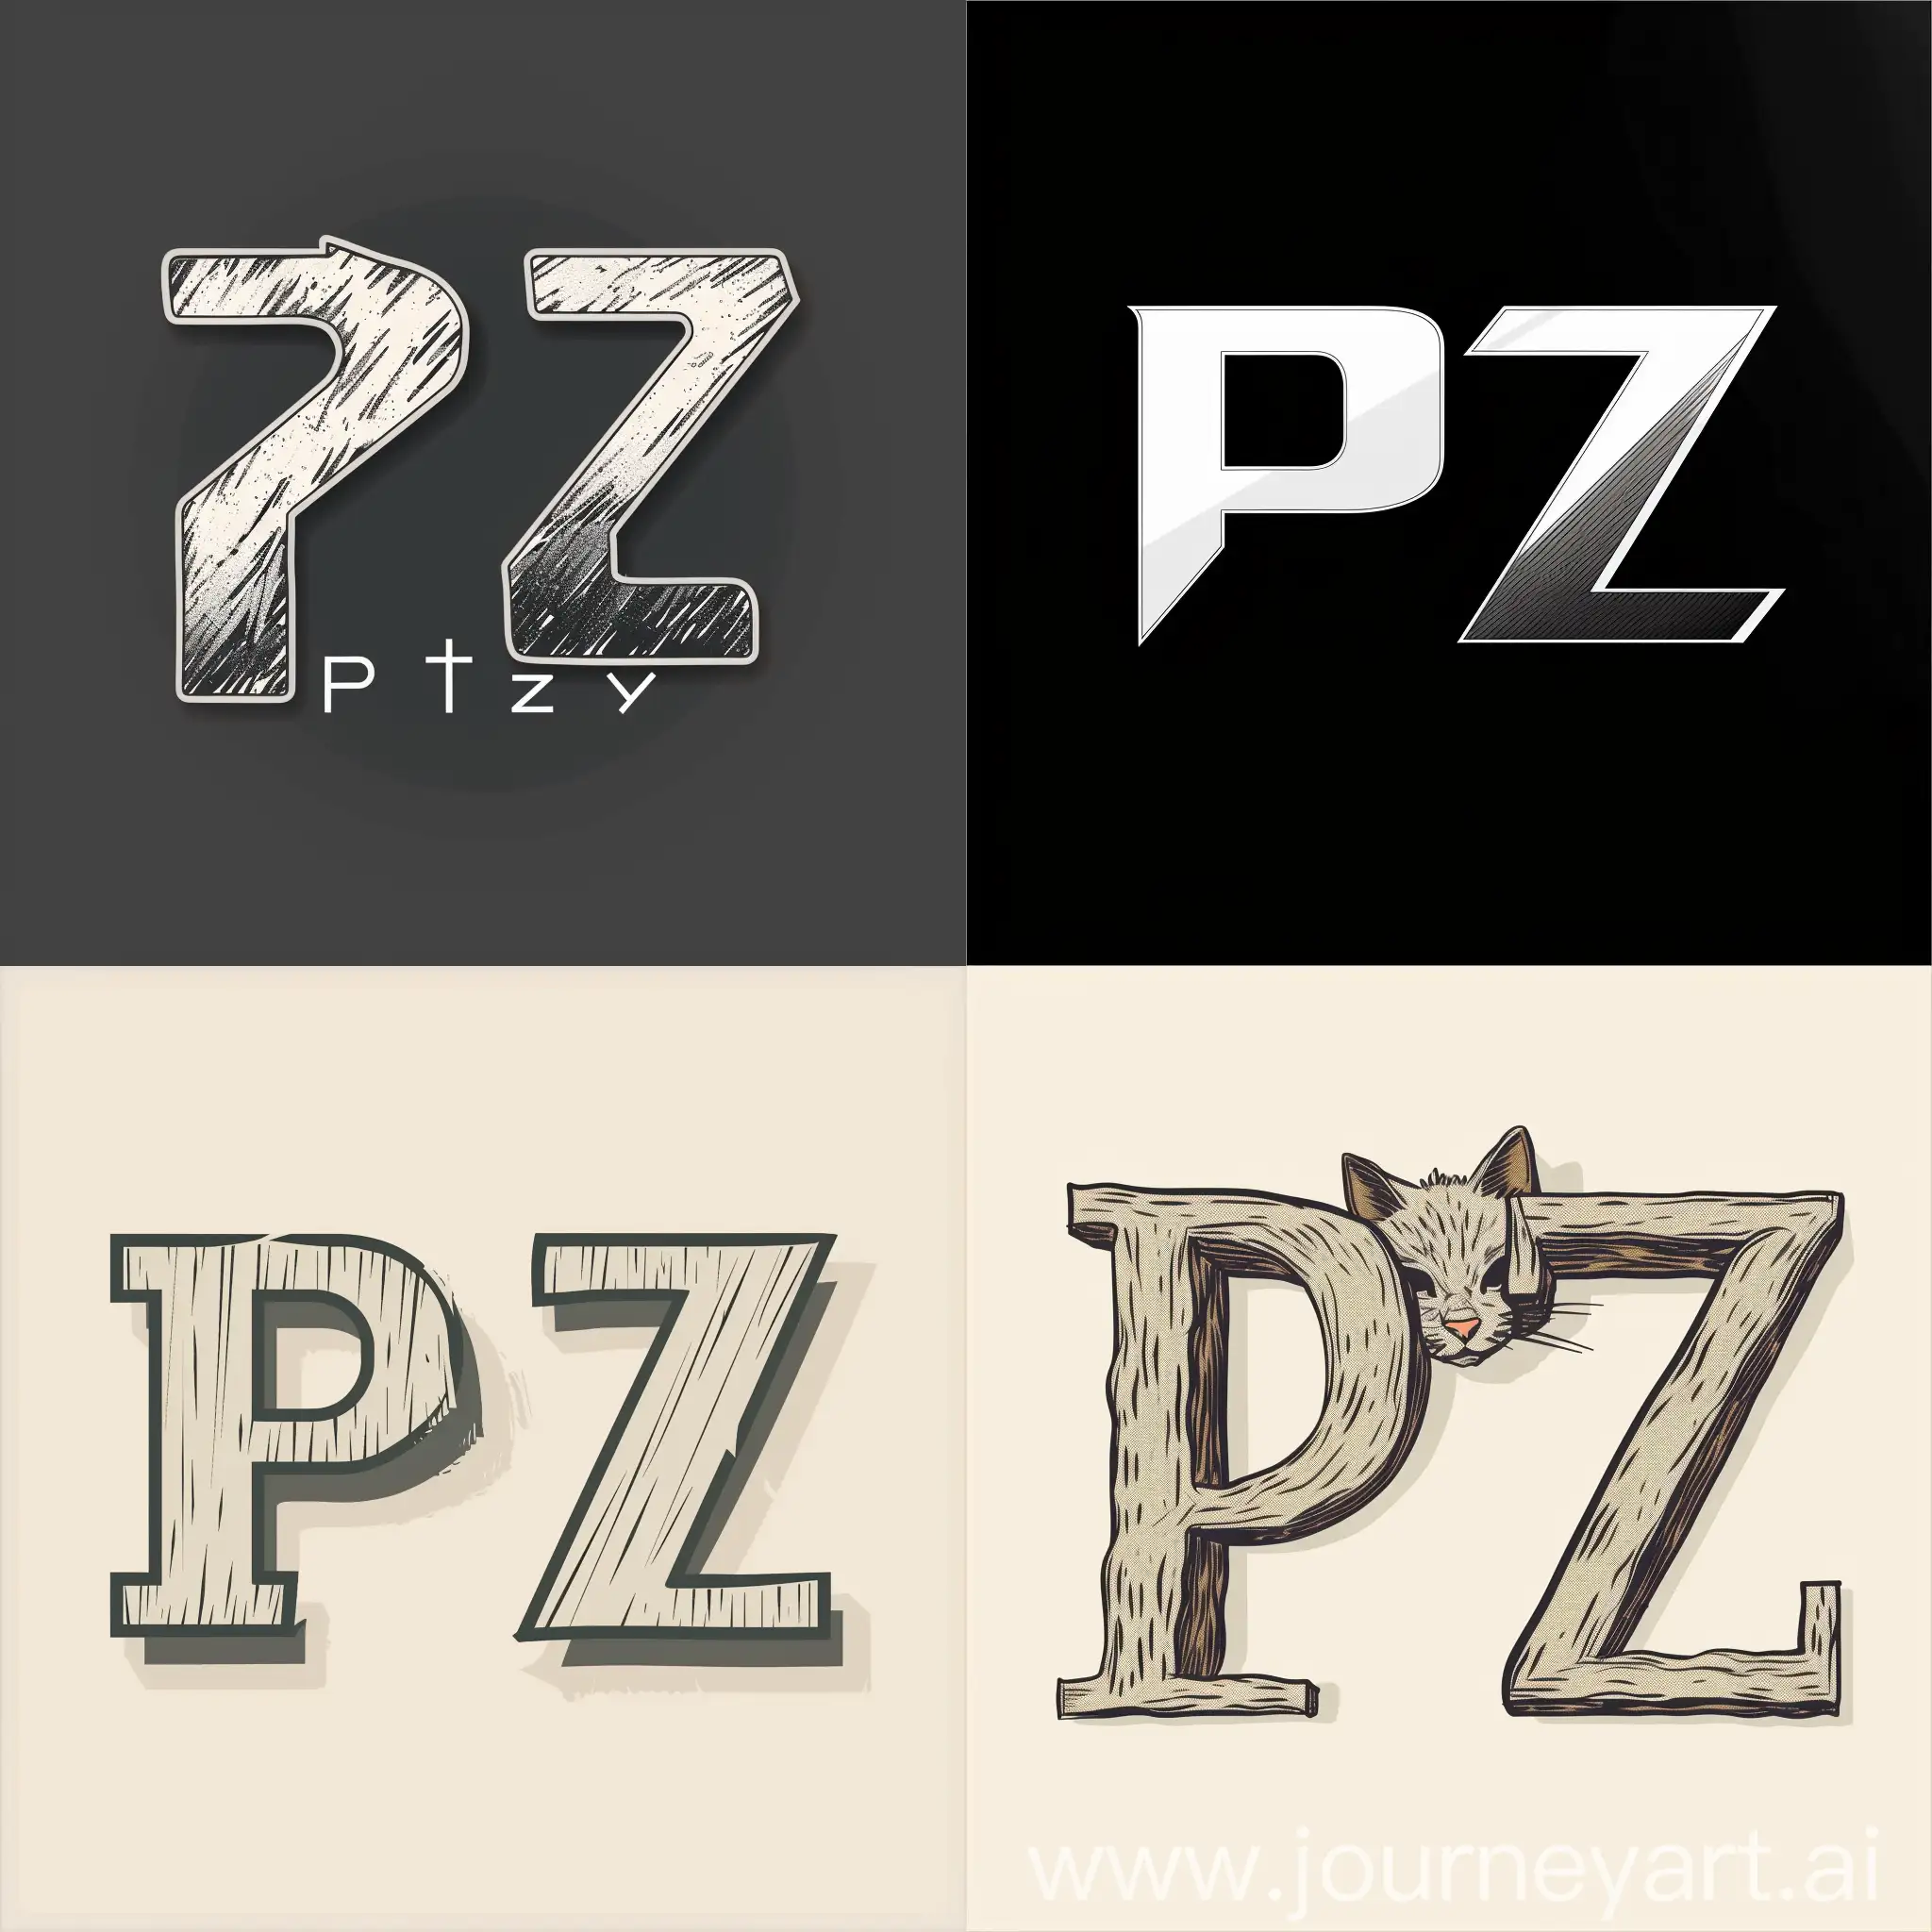 I want to design a brand logo using Petzy, and I require the letters P and Z to be drawn out, in a flat, minimalist style